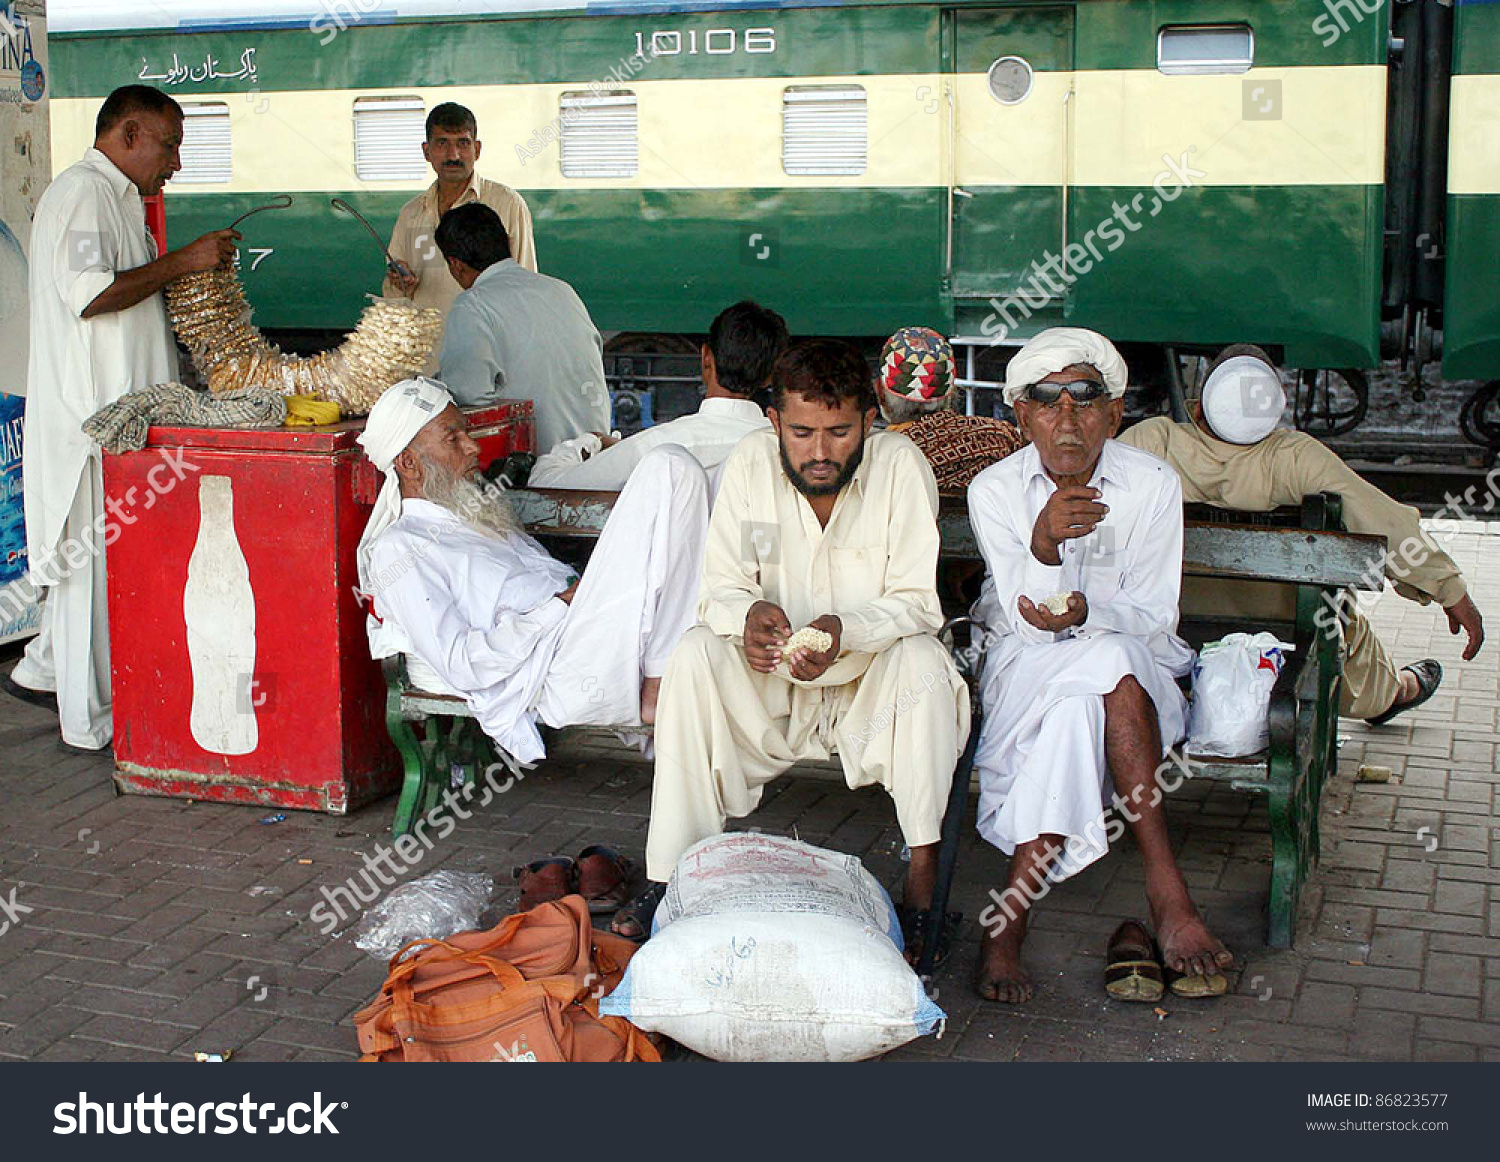 stock-photo-lahore-pakistan-oct-passengers-seen-worried-at-lahore-railway-station-due-to-protest-of-86823577.jpg